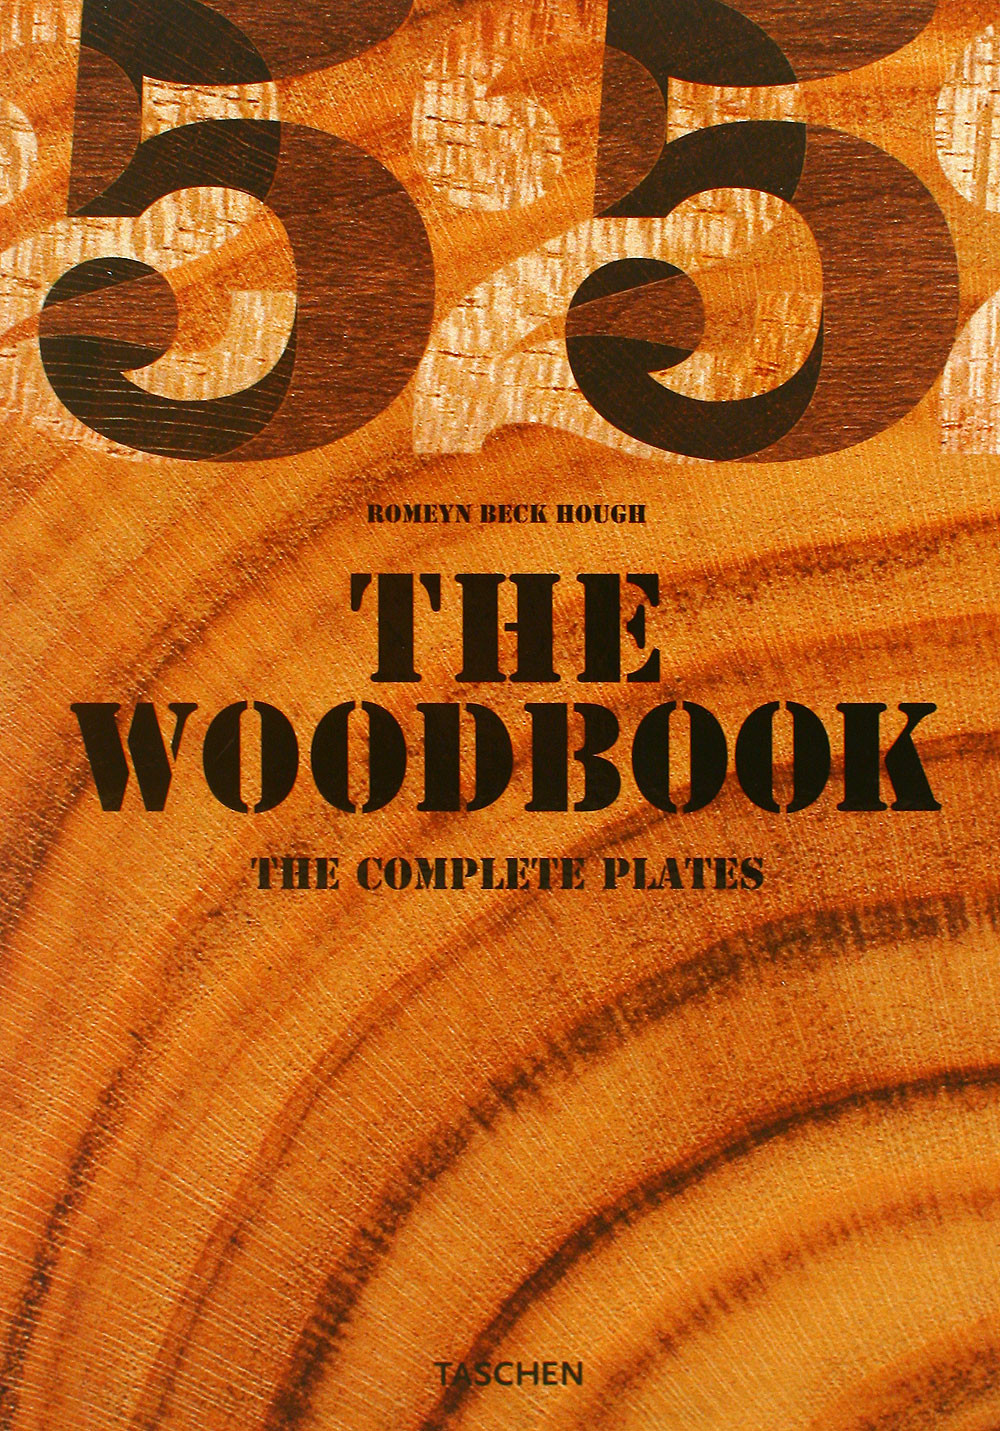 WOODBOOK. THE COMPLETE PLATES